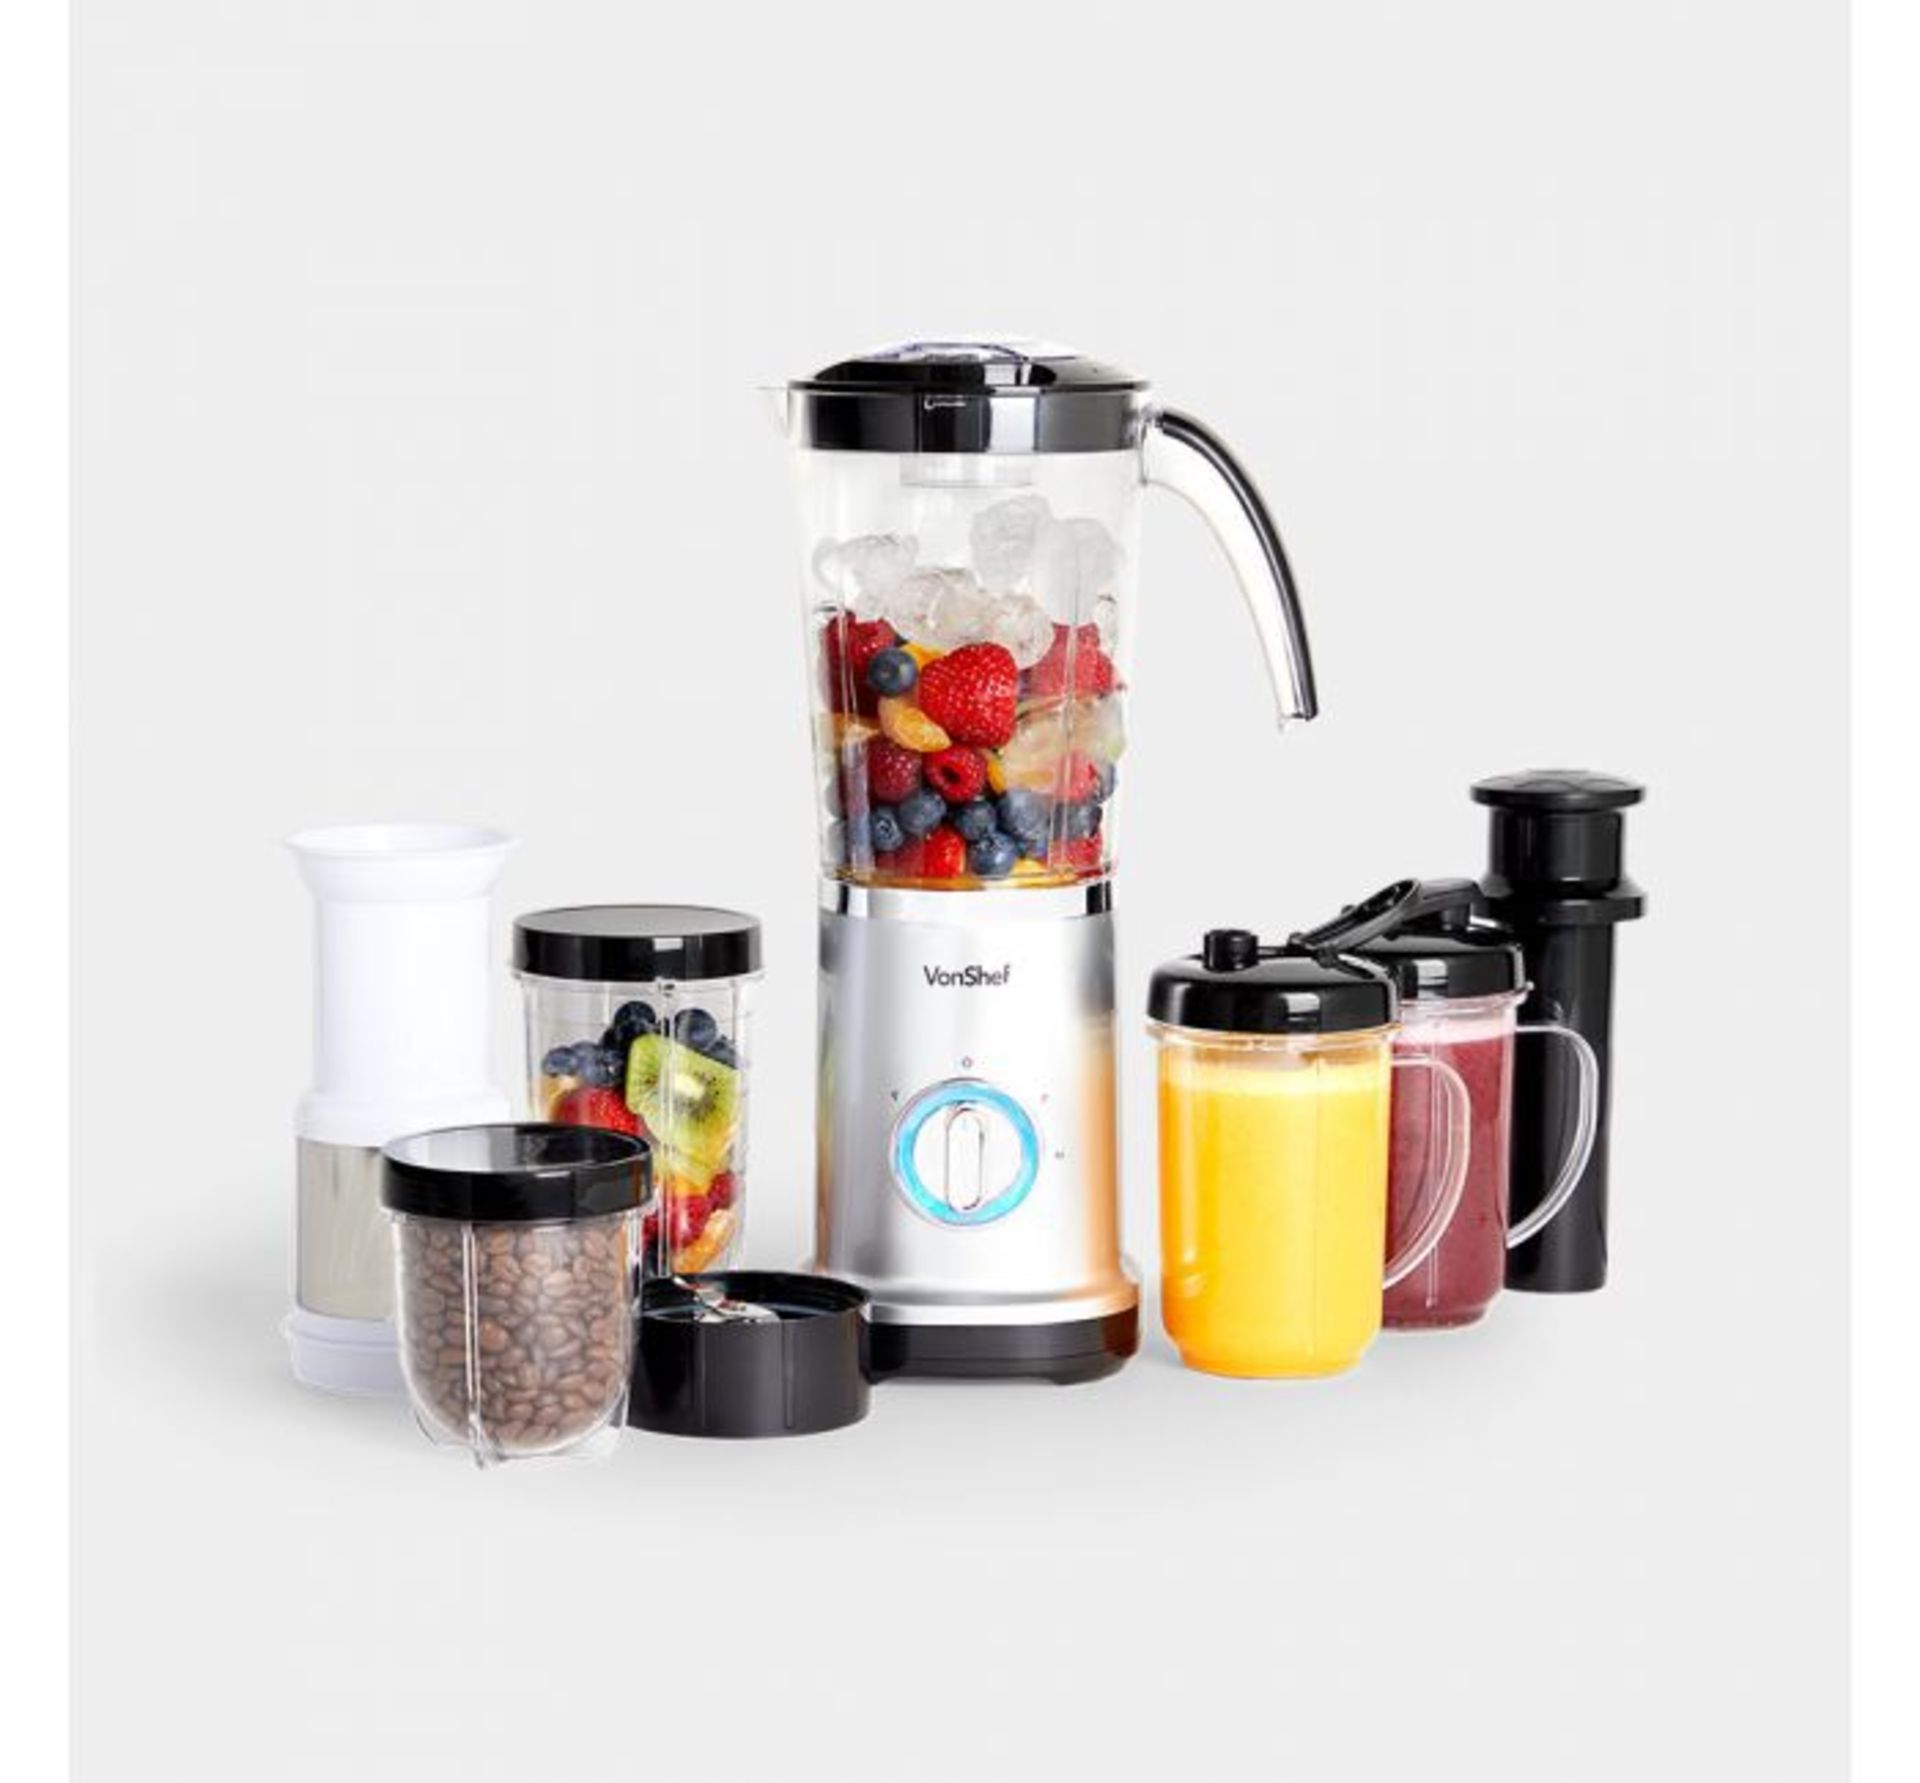 (OM35) 4-in-1 Blender Includes attachments for blending, grinding and juicing, as well as stro... - Image 2 of 3